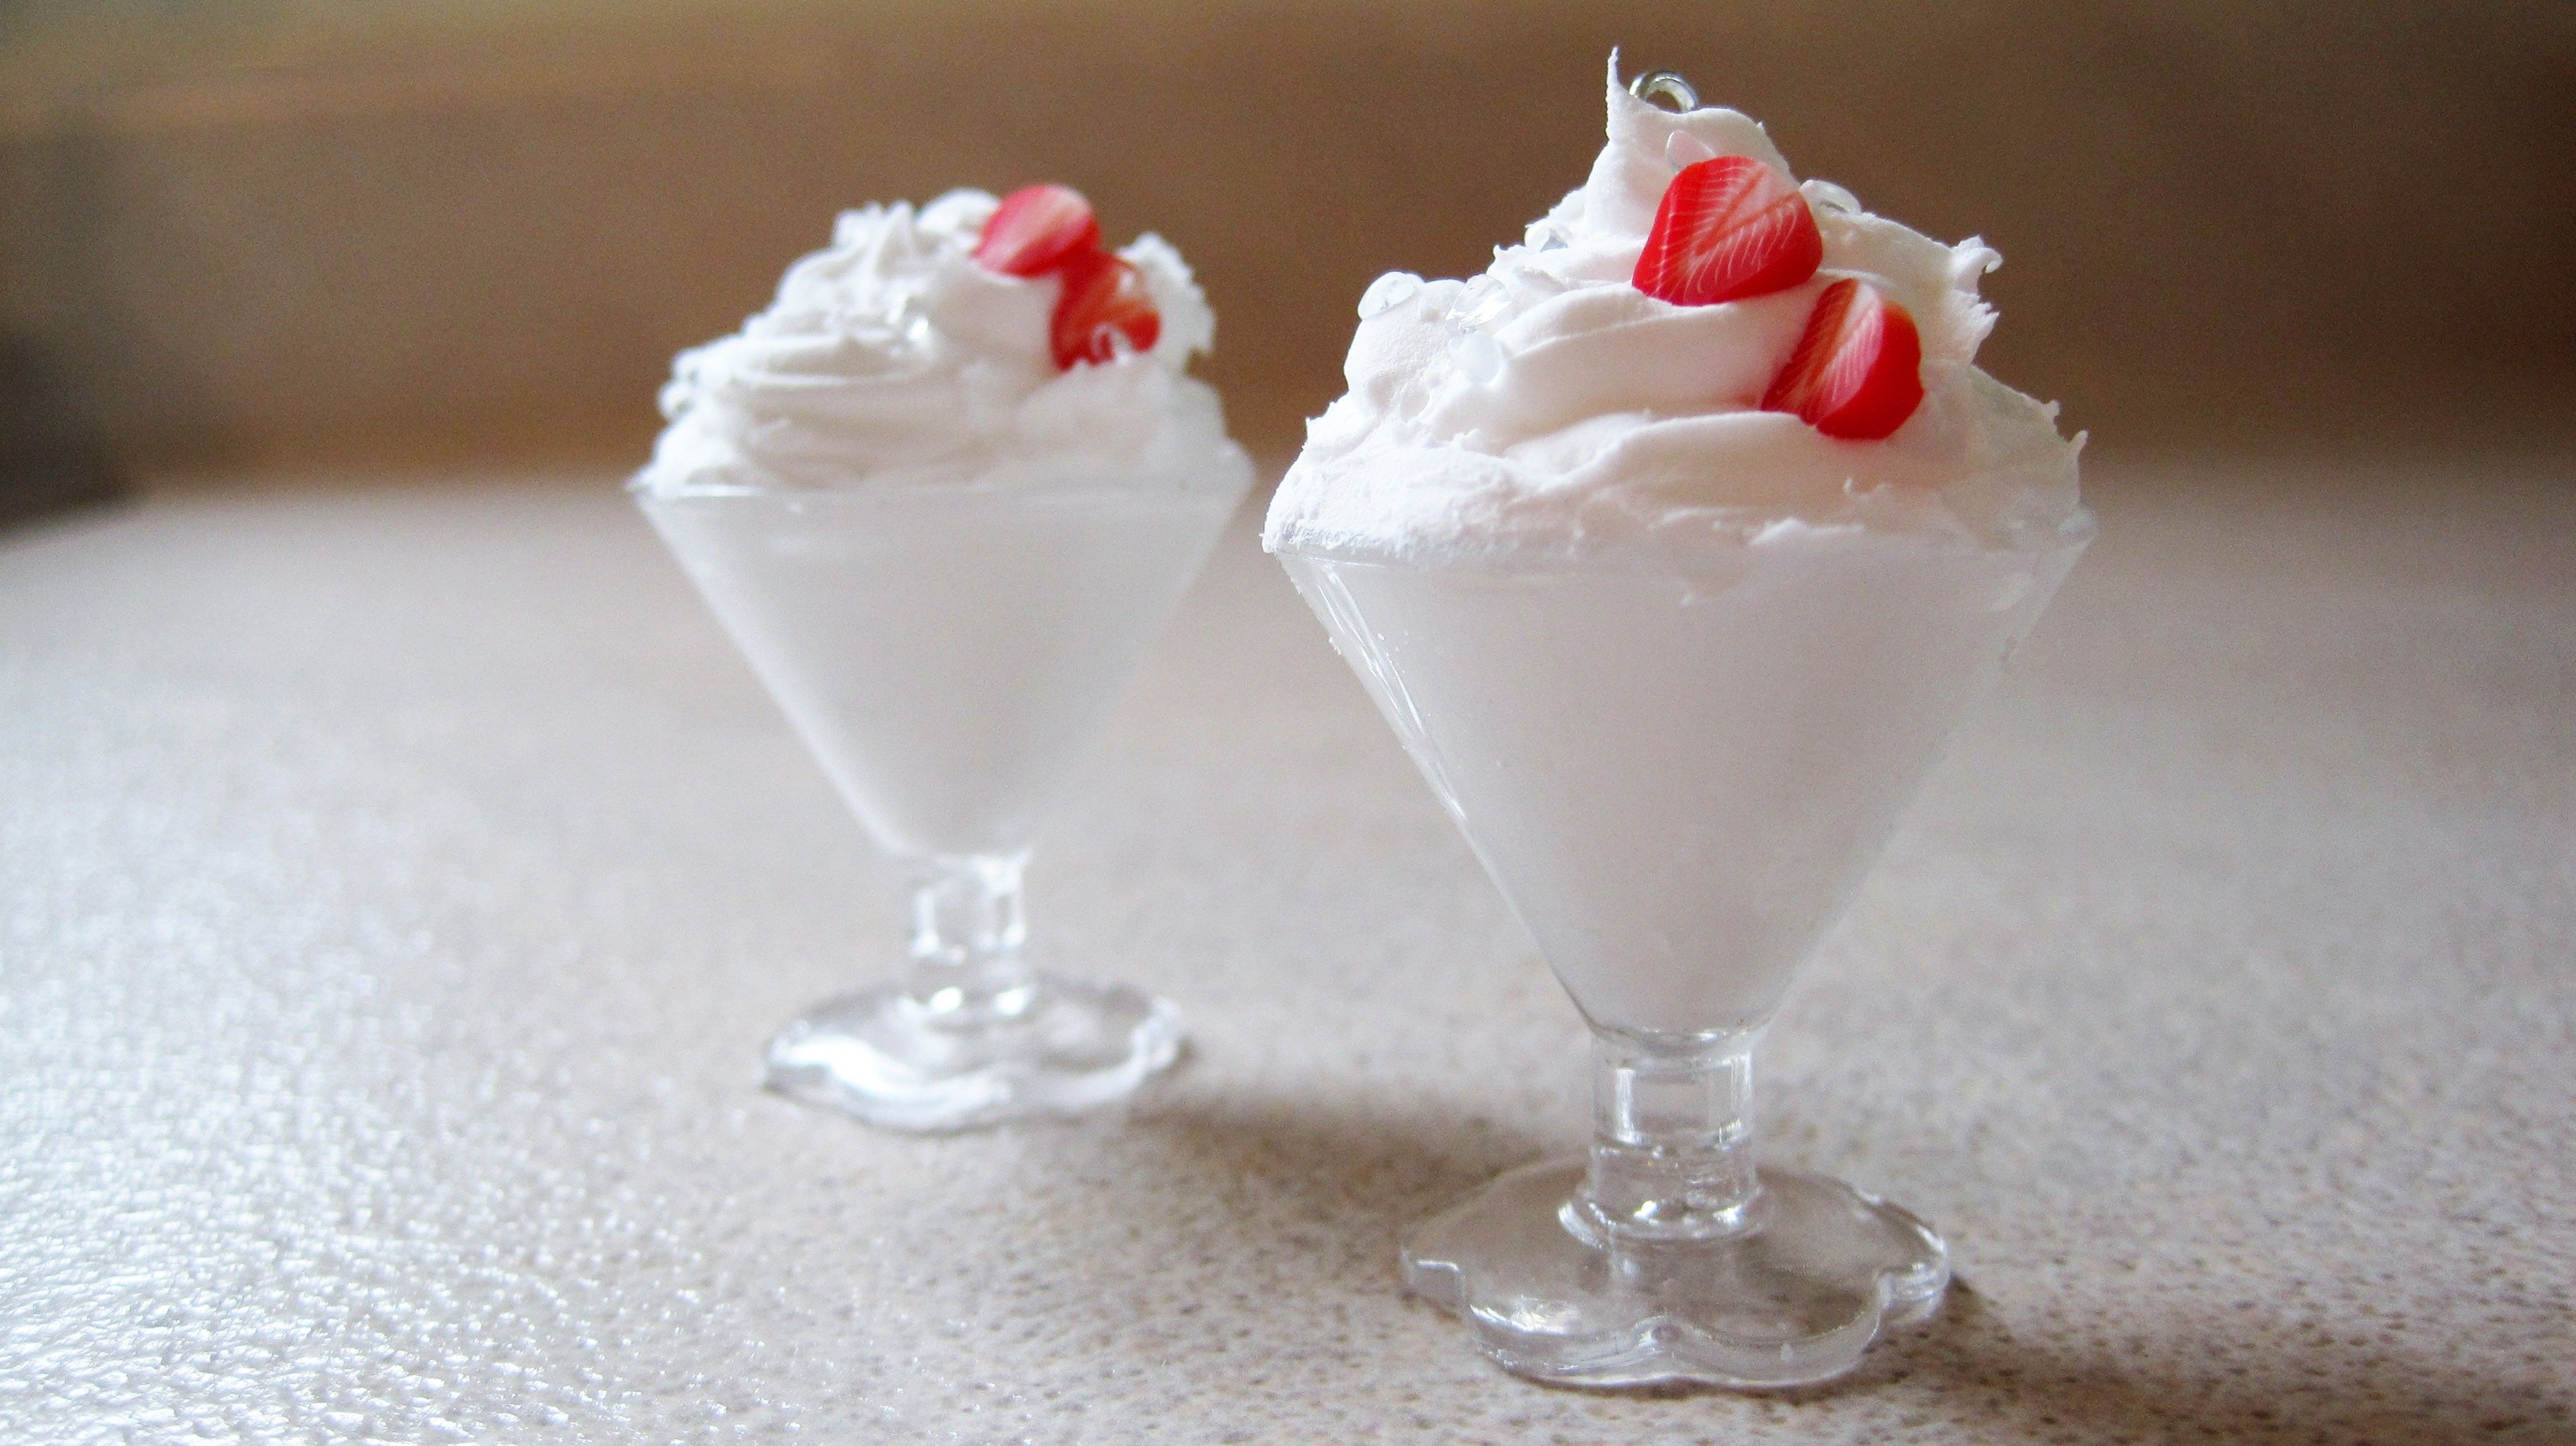 Whipped cream delight, Fluffy and creamy, Tempting topping, Indulgent delight, 3650x2050 HD Desktop